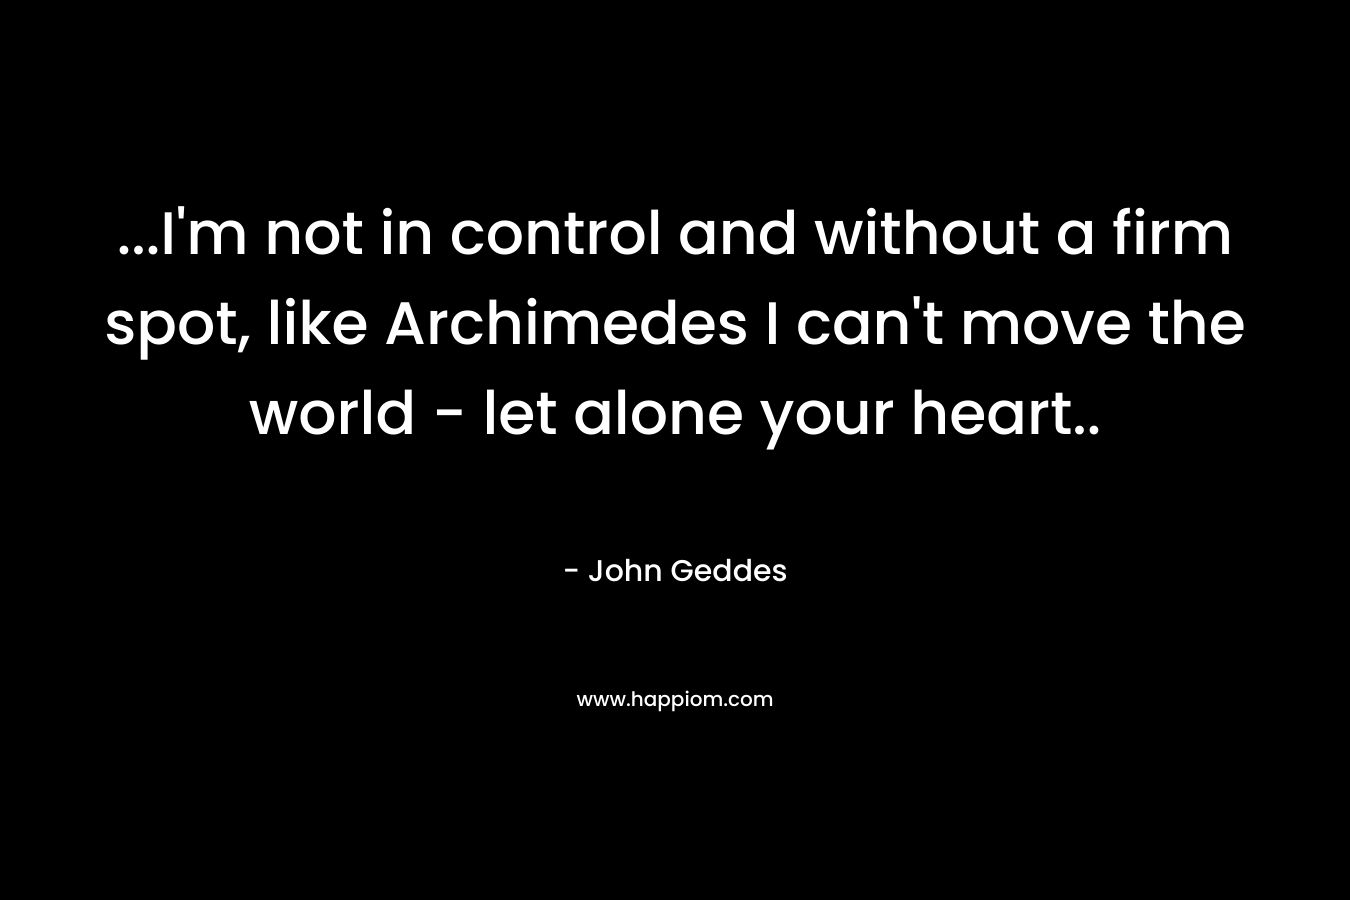 ...I'm not in control and without a firm spot, like Archimedes I can't move the world - let alone your heart..